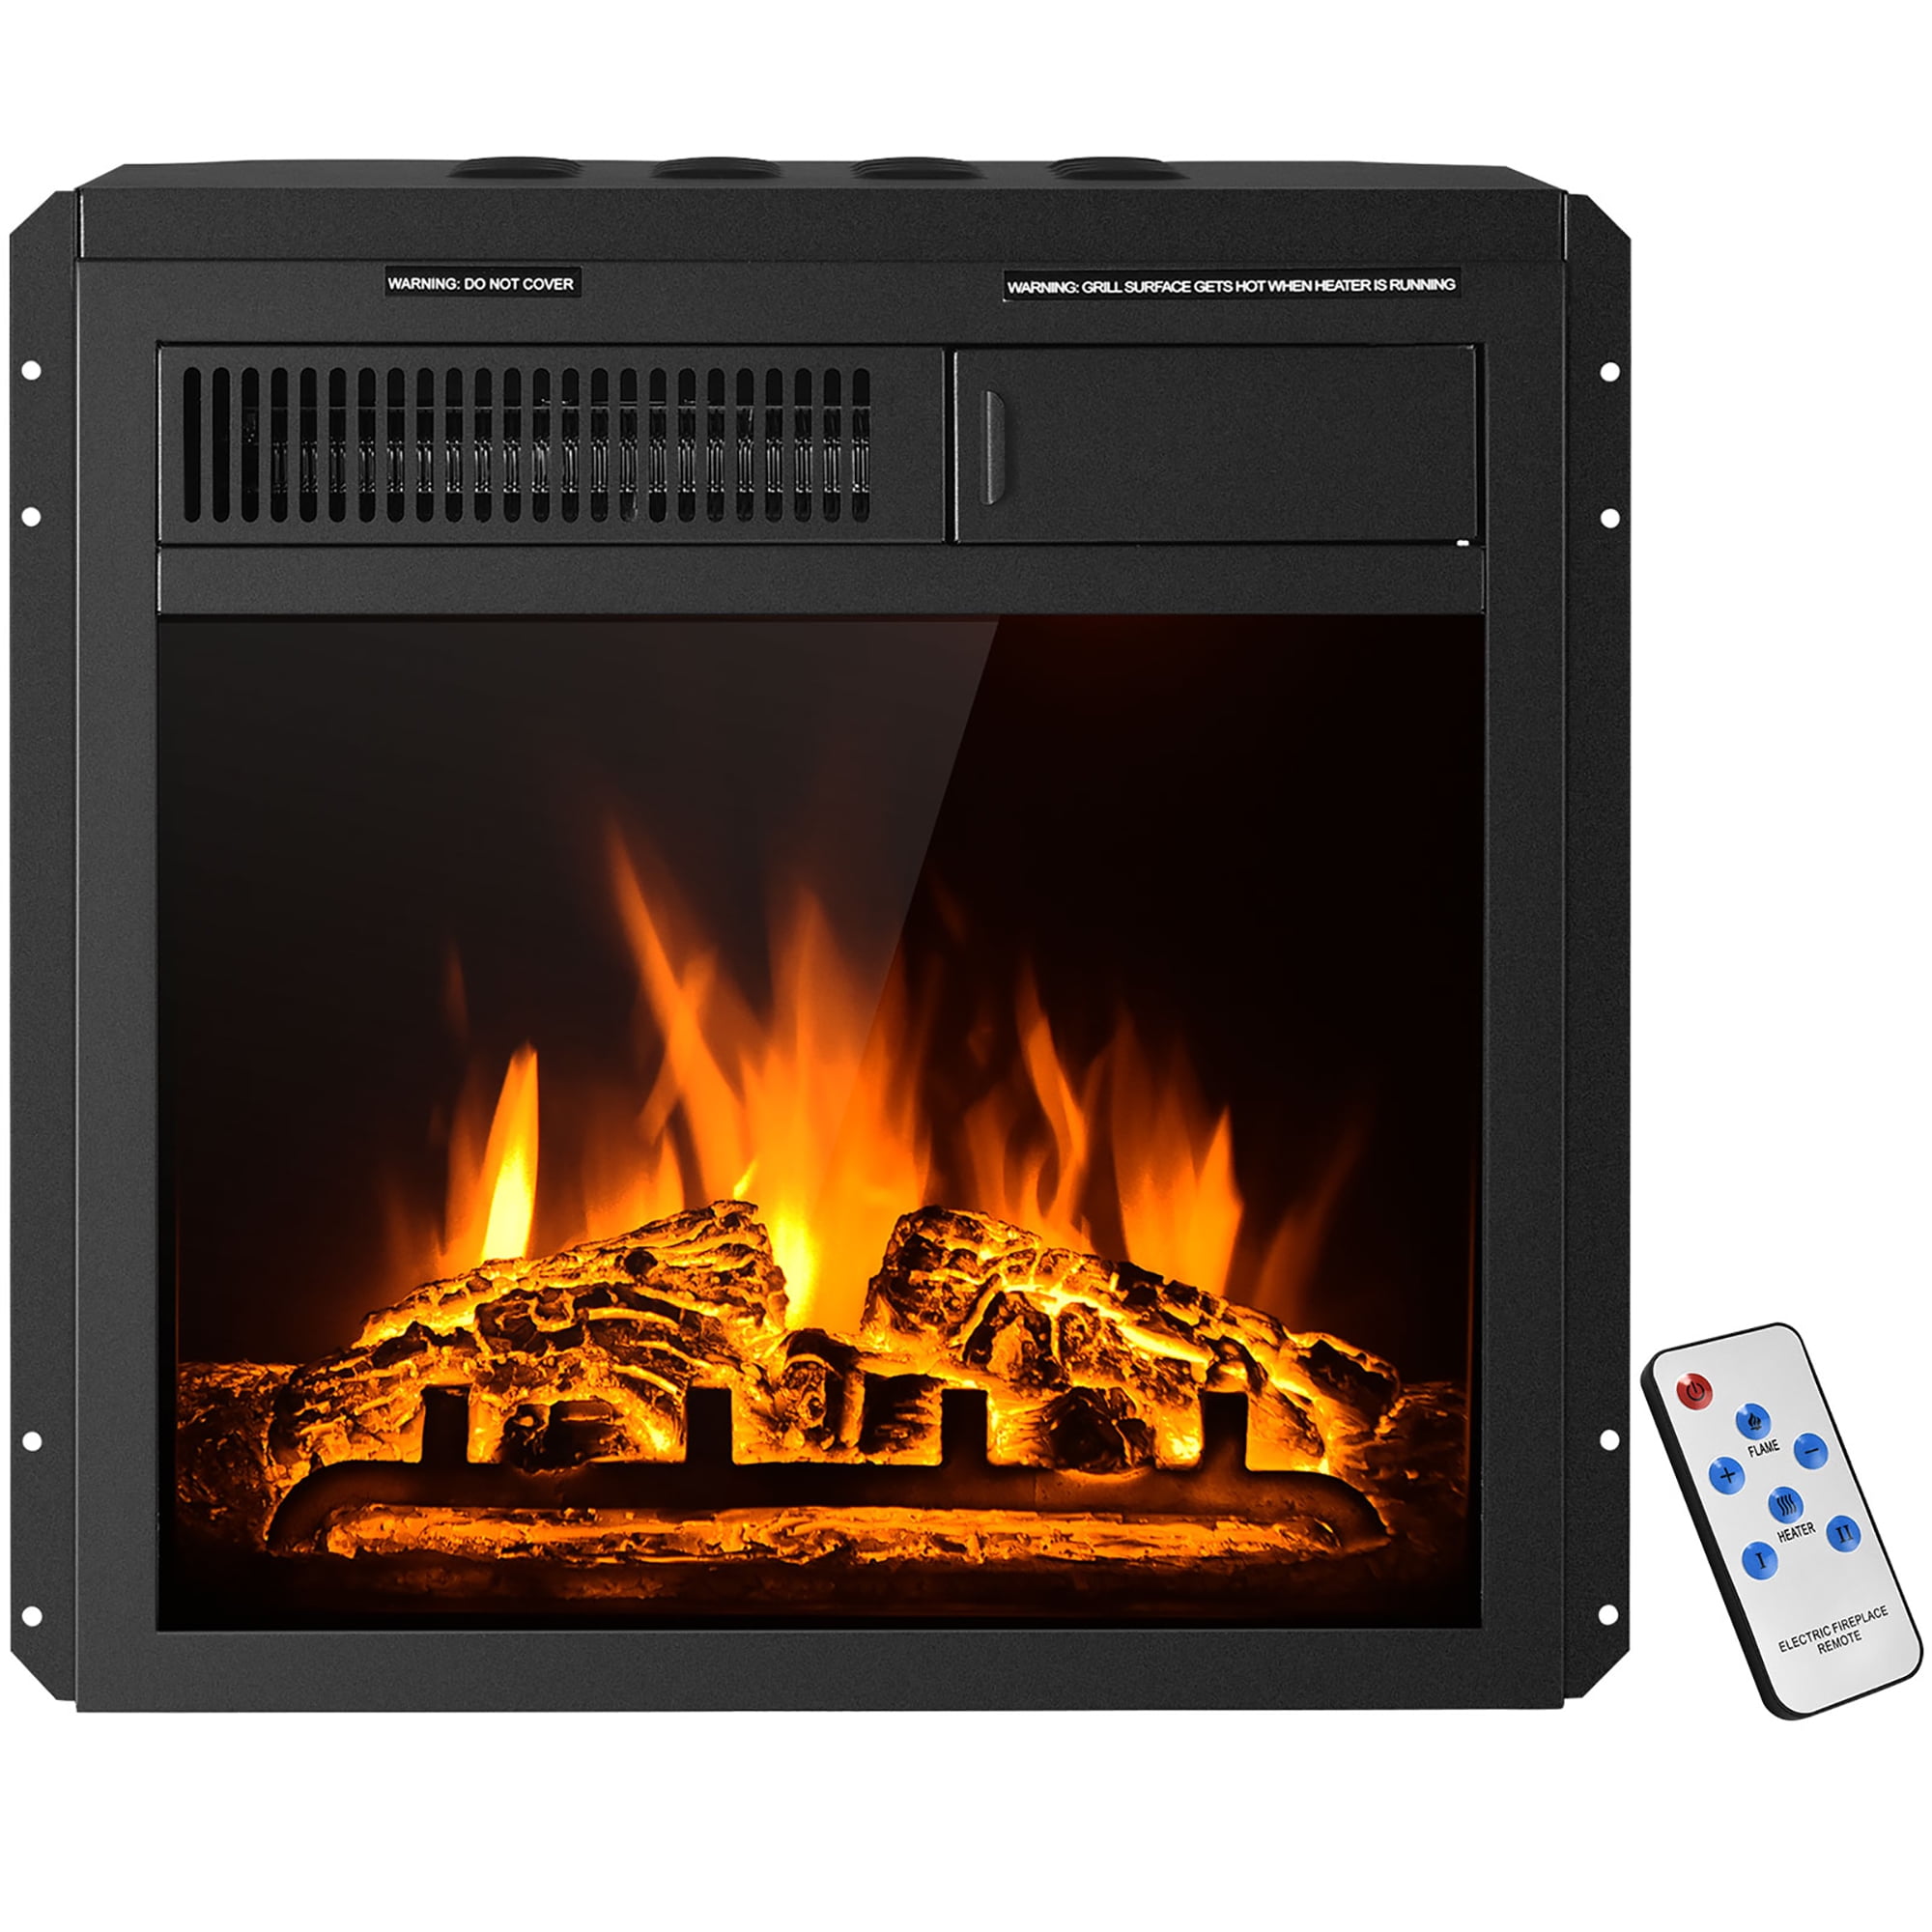 Costway 18 Electric Fireplace Insert, Electric Fireplace Heater Realistic Flame And Logs With Glowing Embers